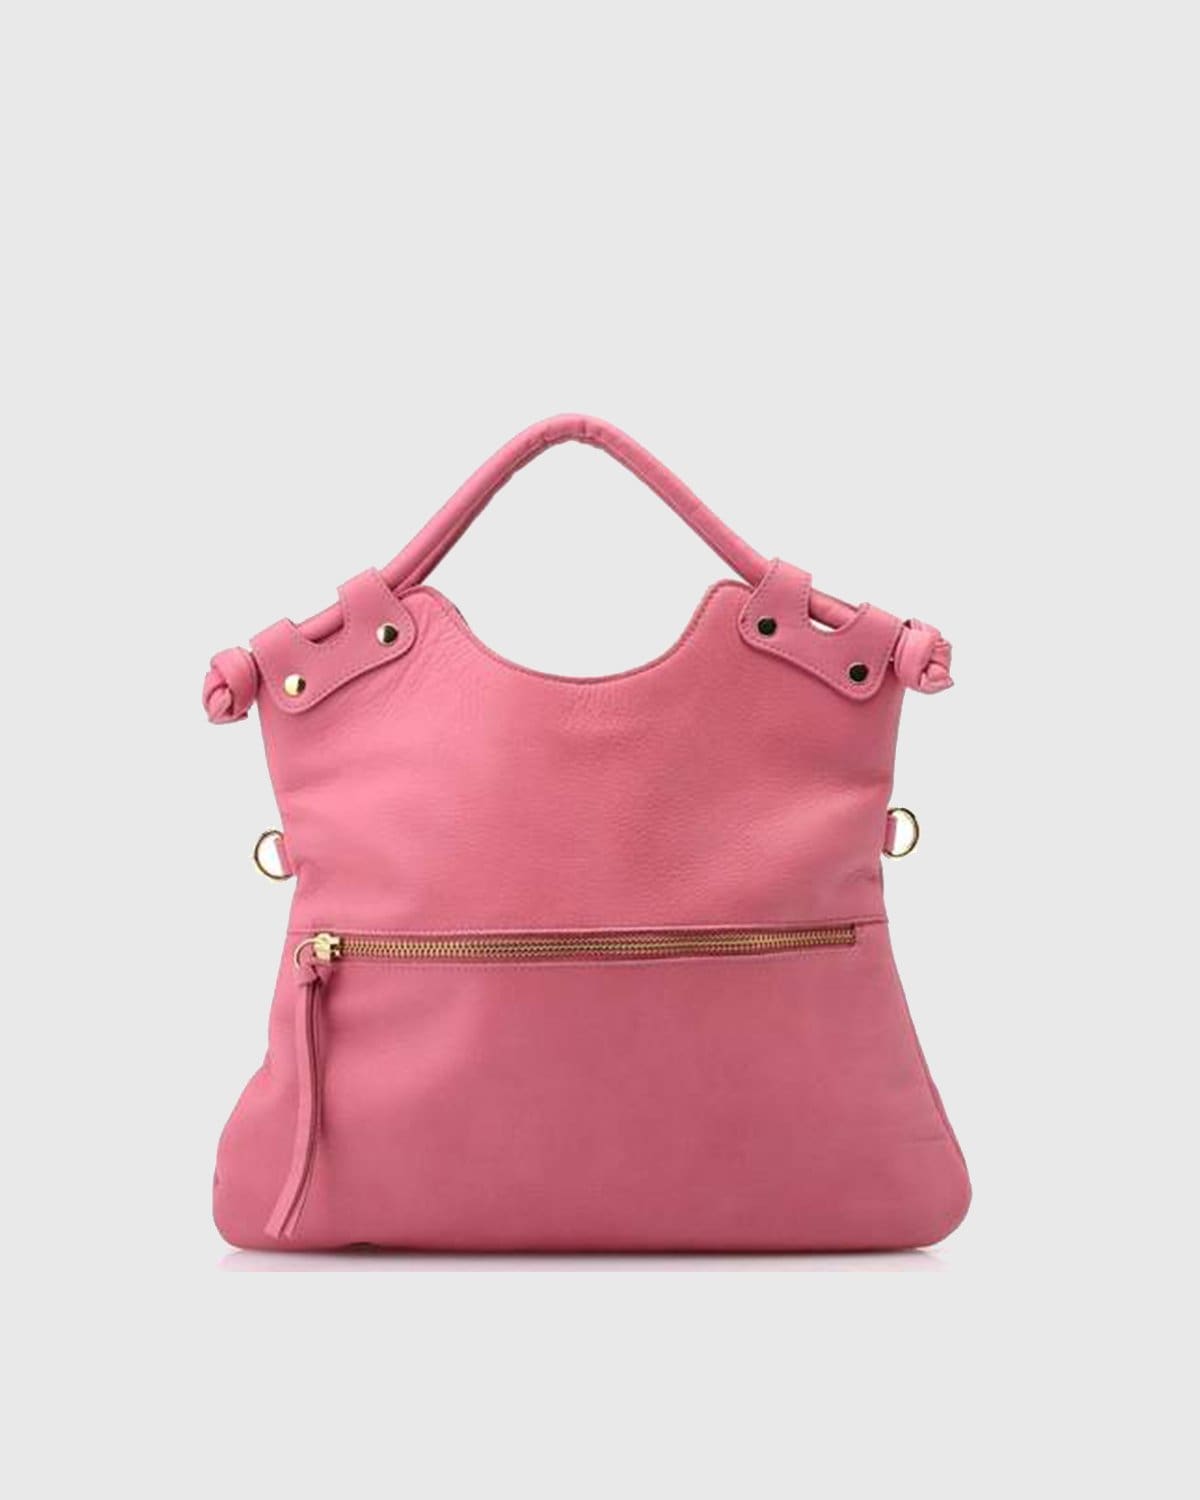 Brooklyn - Bright Pink Bags | Pietro NYC